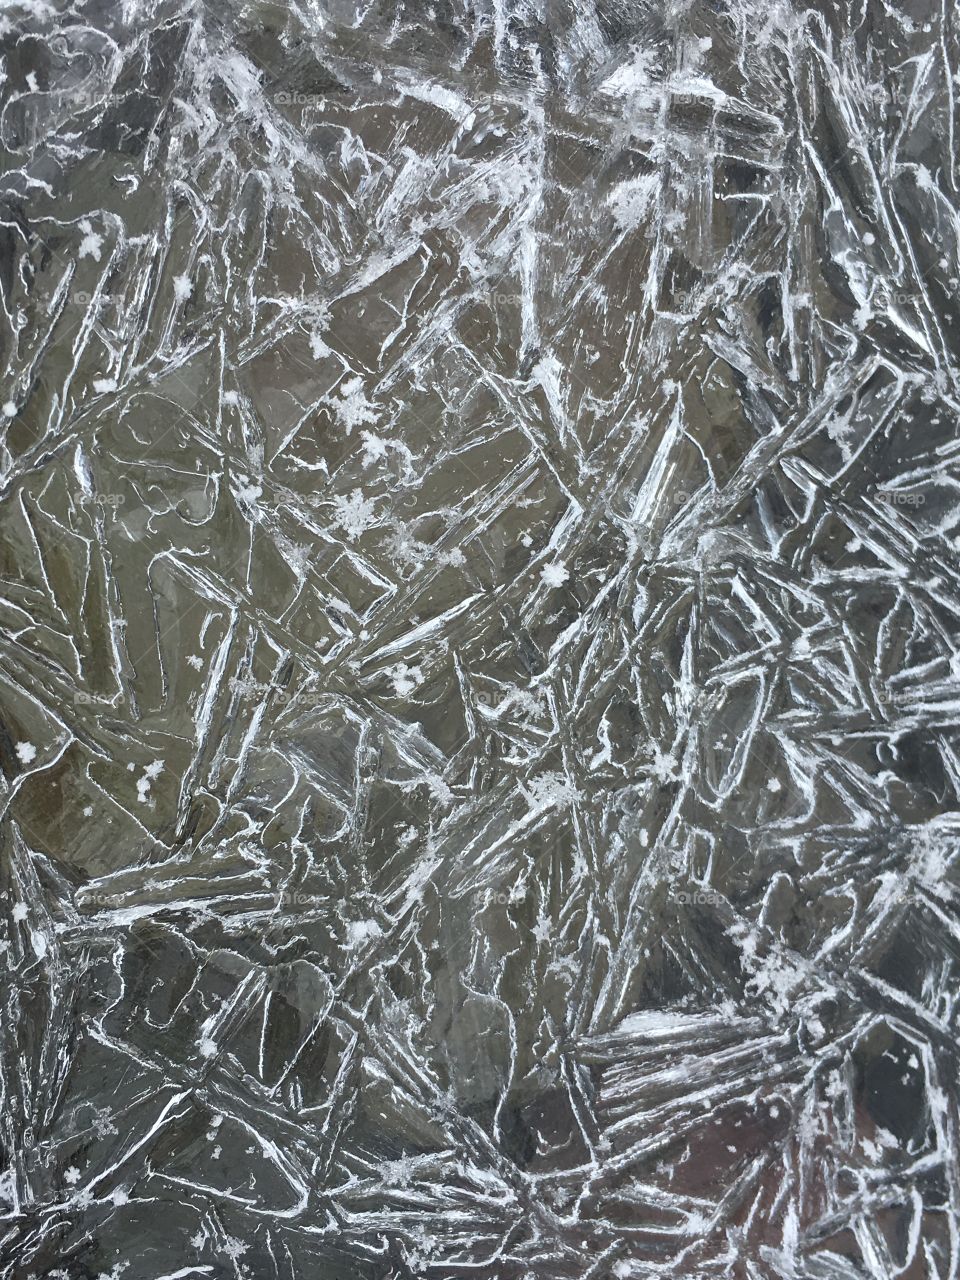 Ice patterns in the river.